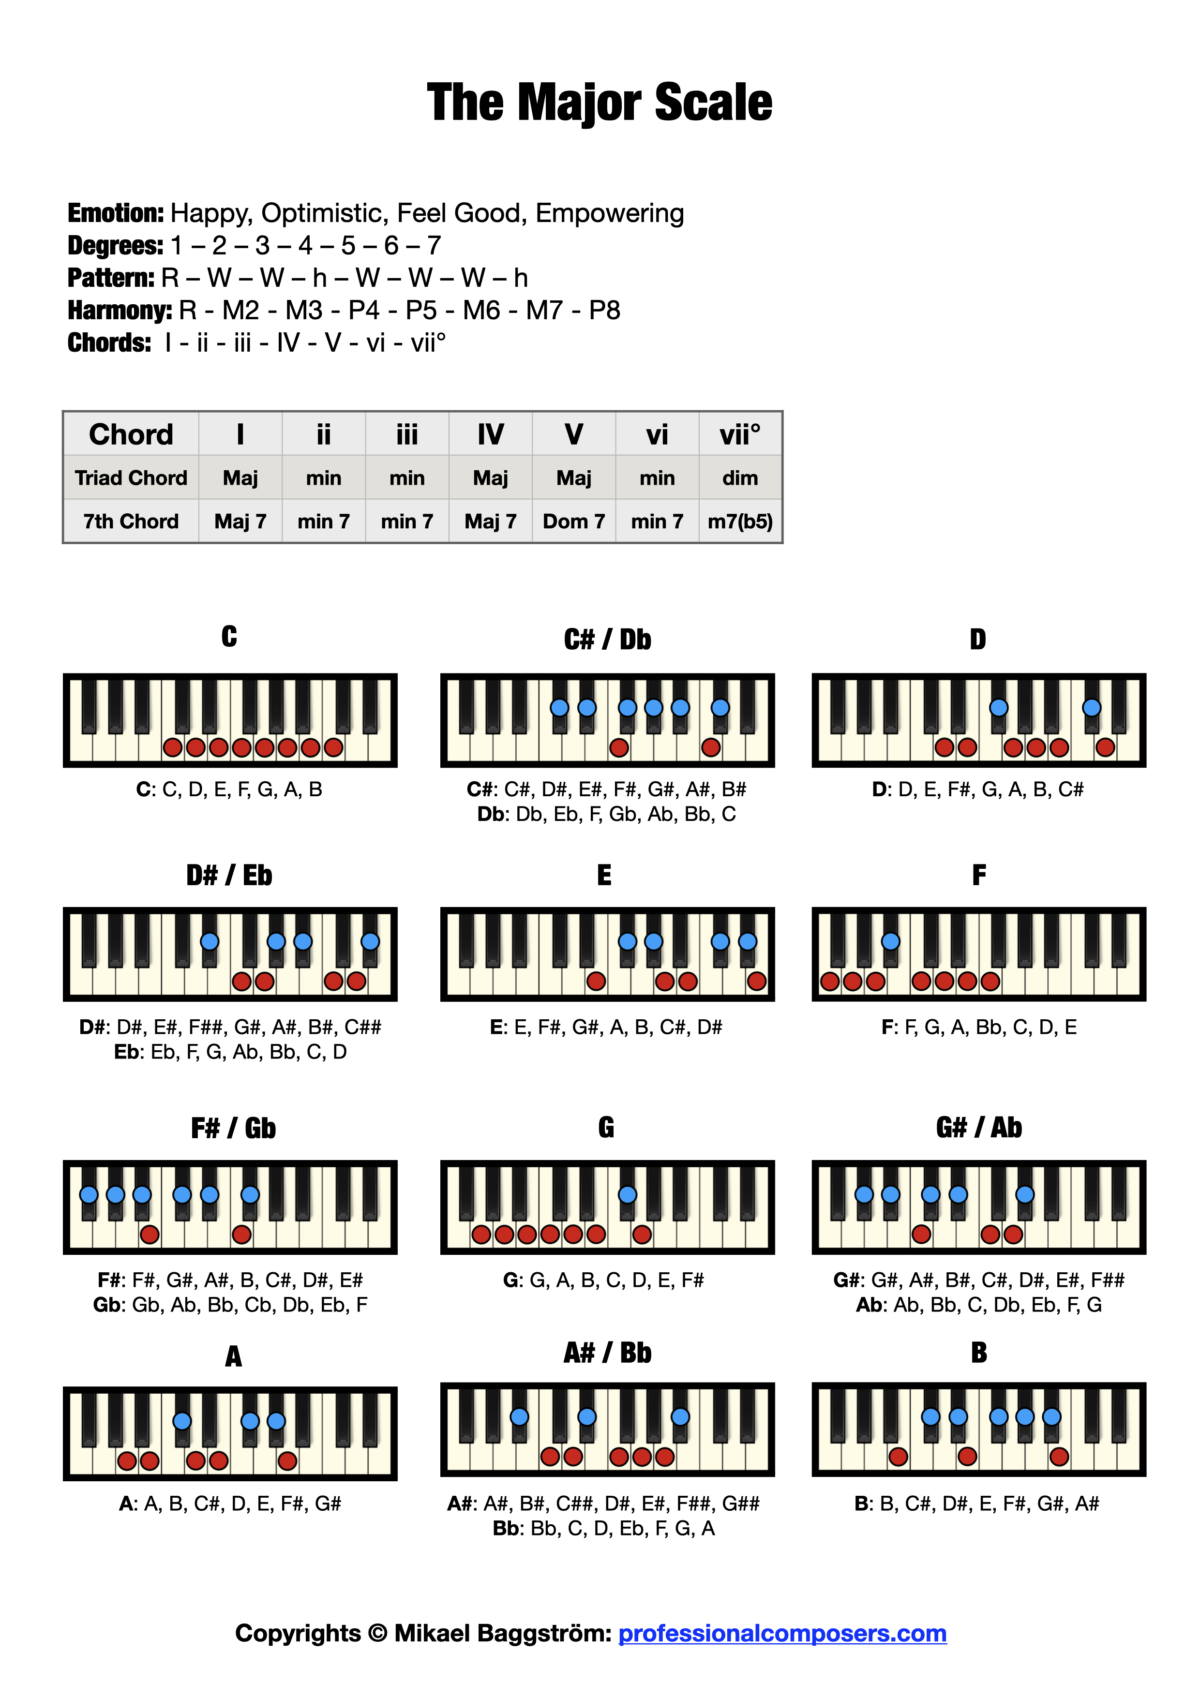 Piano Scale Chart - The Major Scale